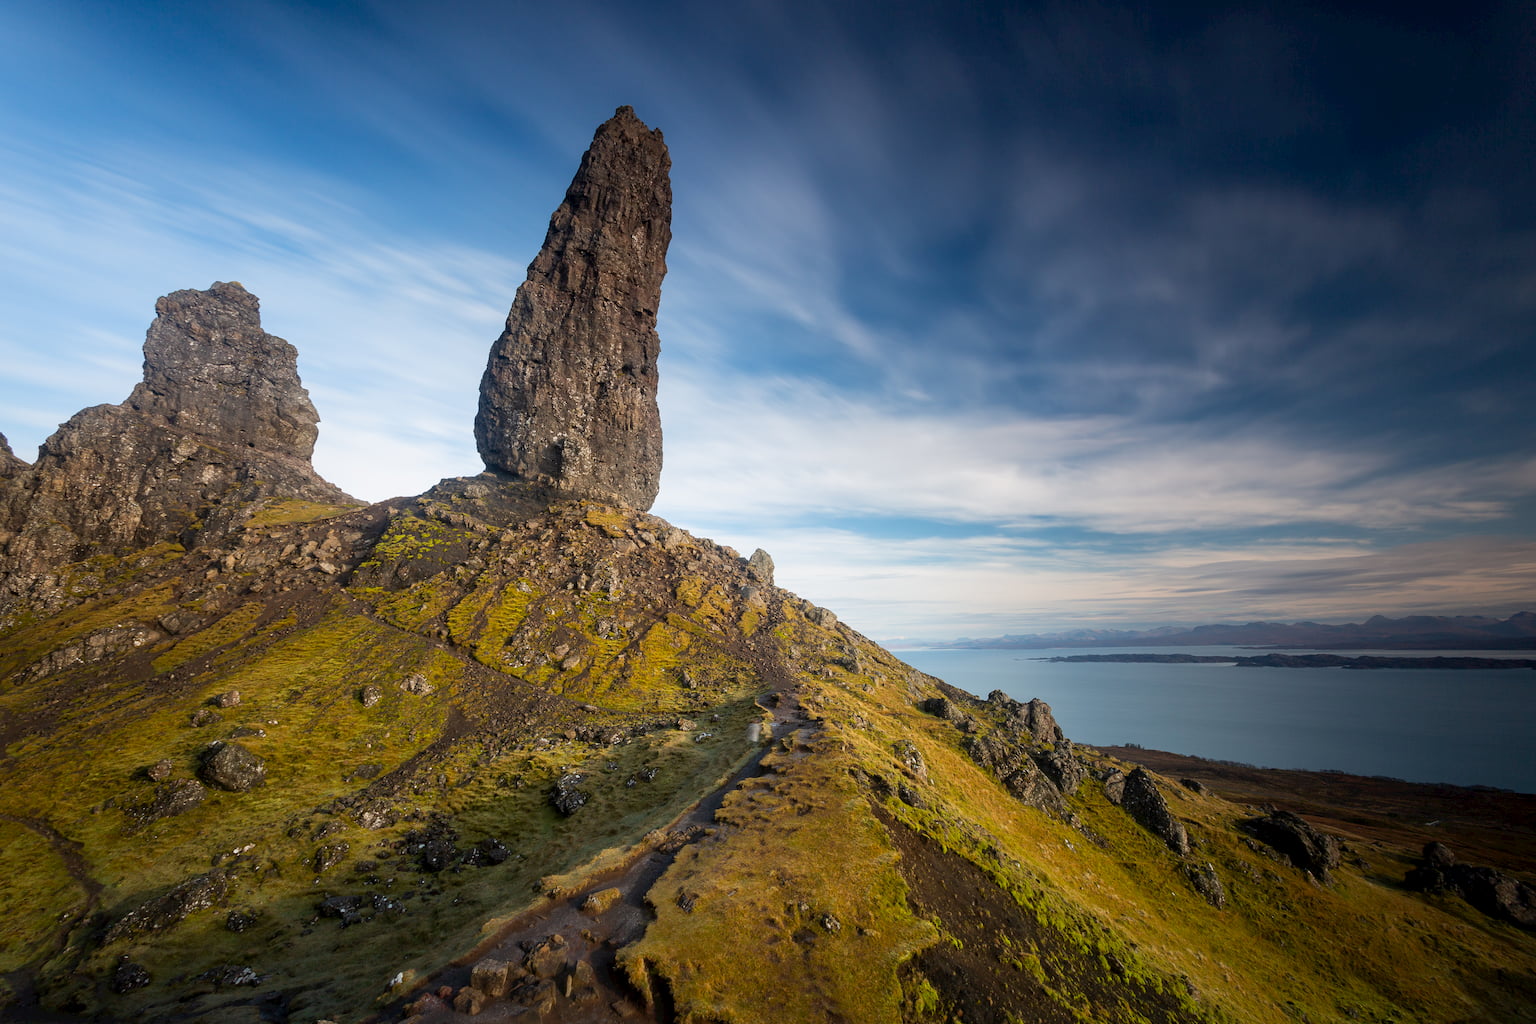 The Old Man of Storr precariously perched on a hill top, Isle of Skye, Scotland.